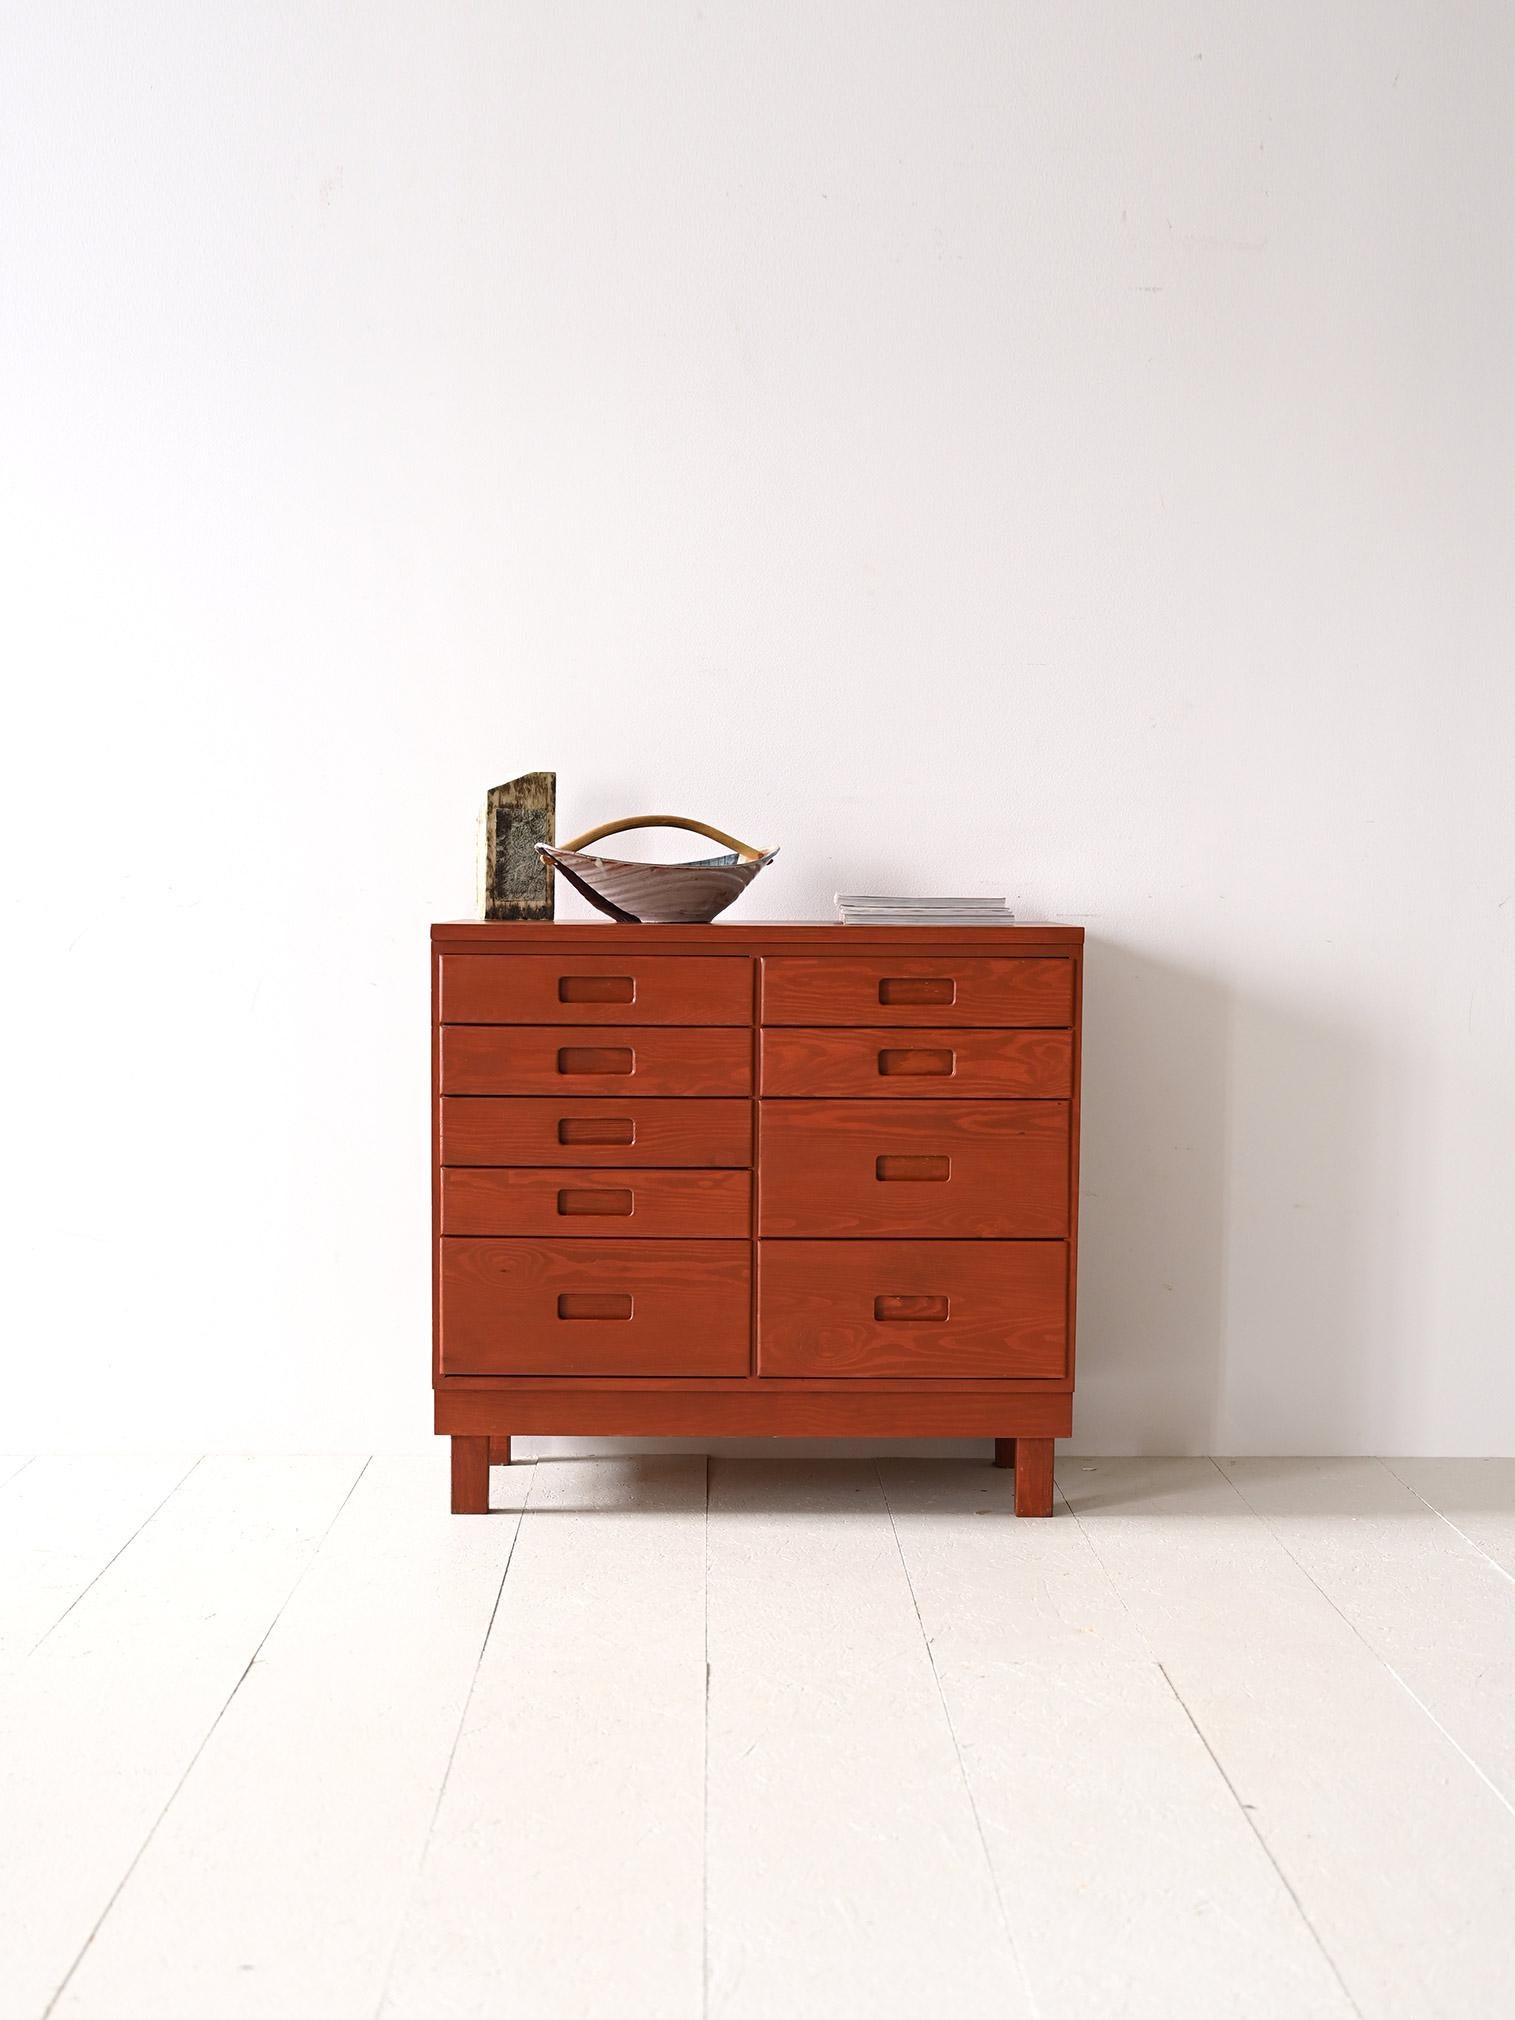 Scandinavian cabinet with 9 drawers

A modern furniture piece consisting of drawers of different sizes with the handle carved from wood.
The simple, square structure hints at the Nordic taste of mid-century design.
Due to its small size and numerous